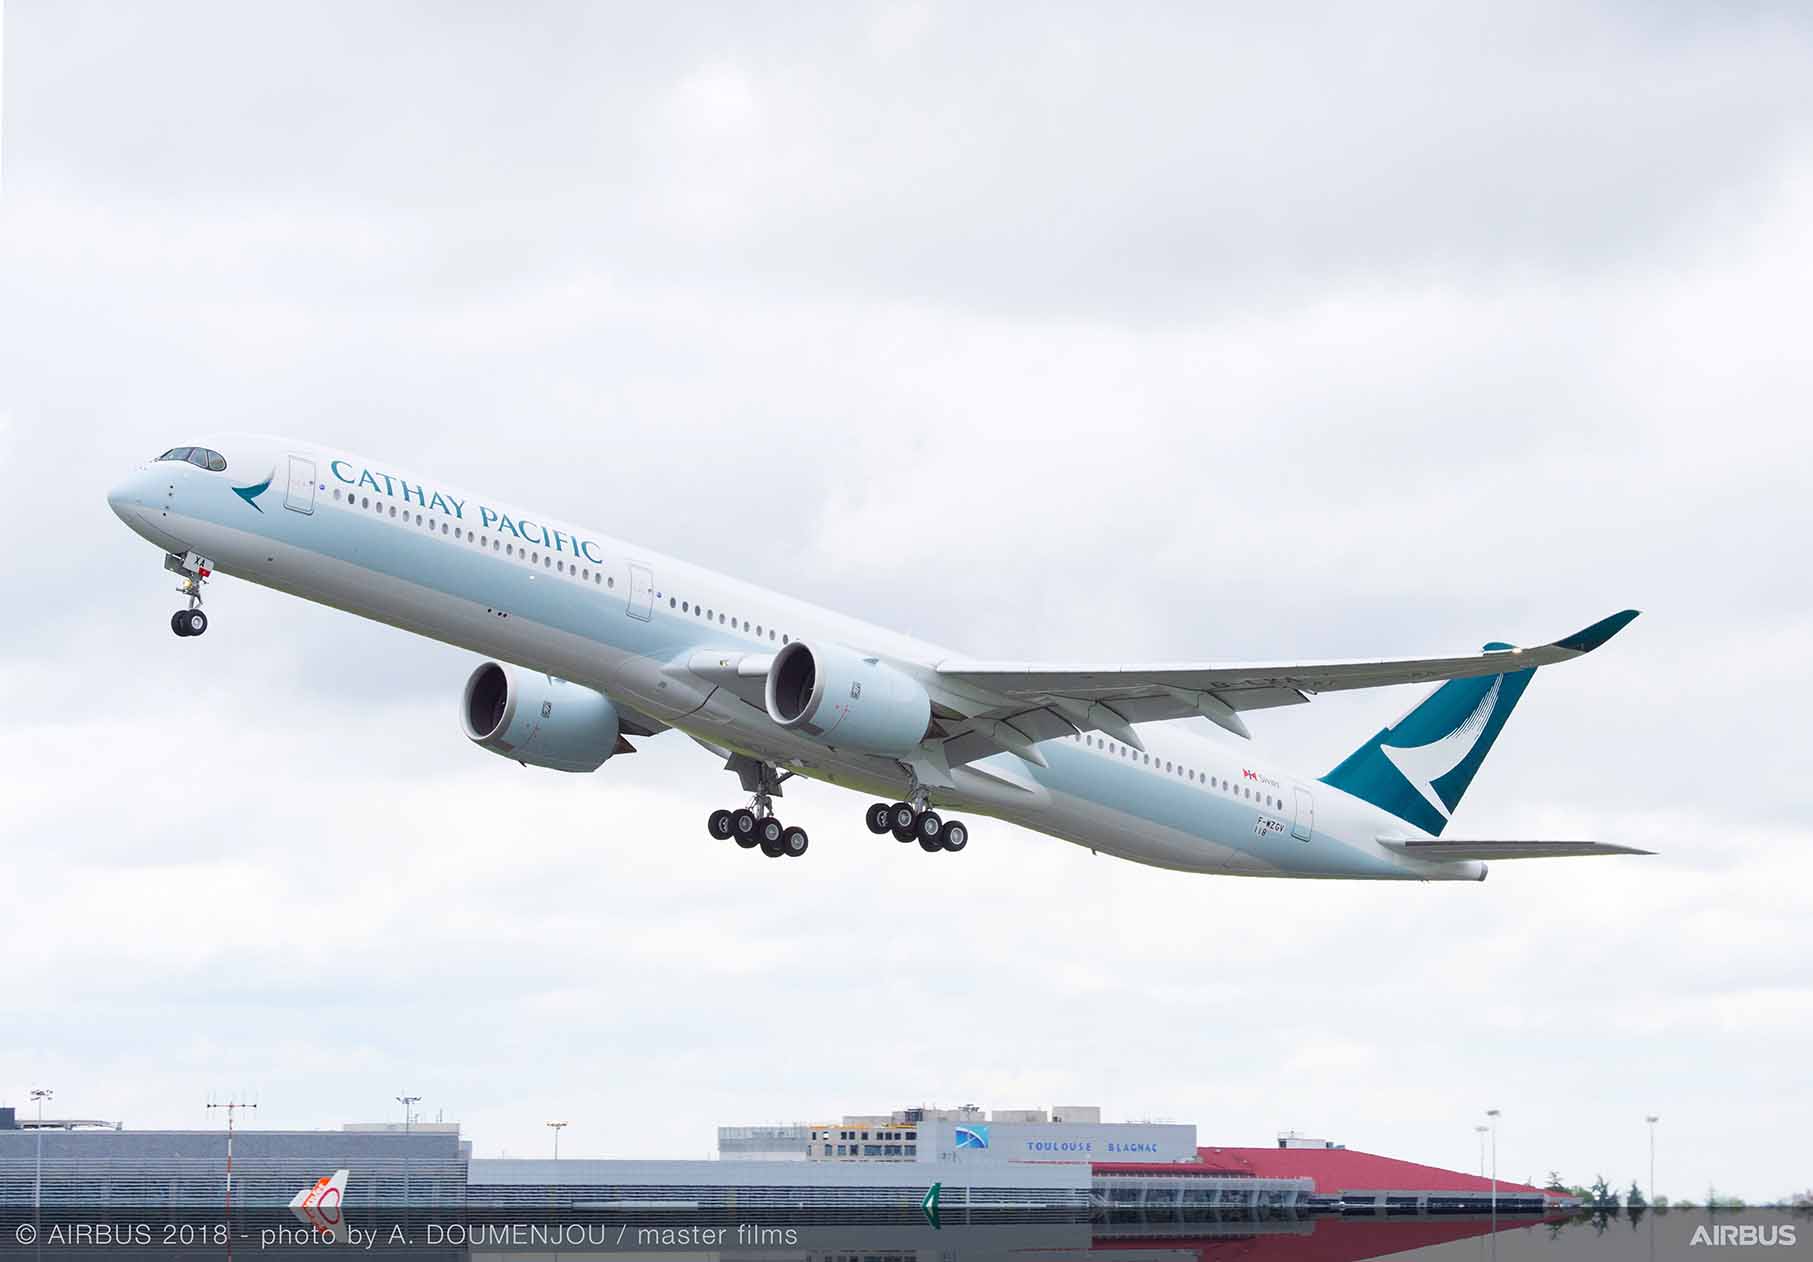 Cathay Pacific reports steep increase in Dec. passenger traffic